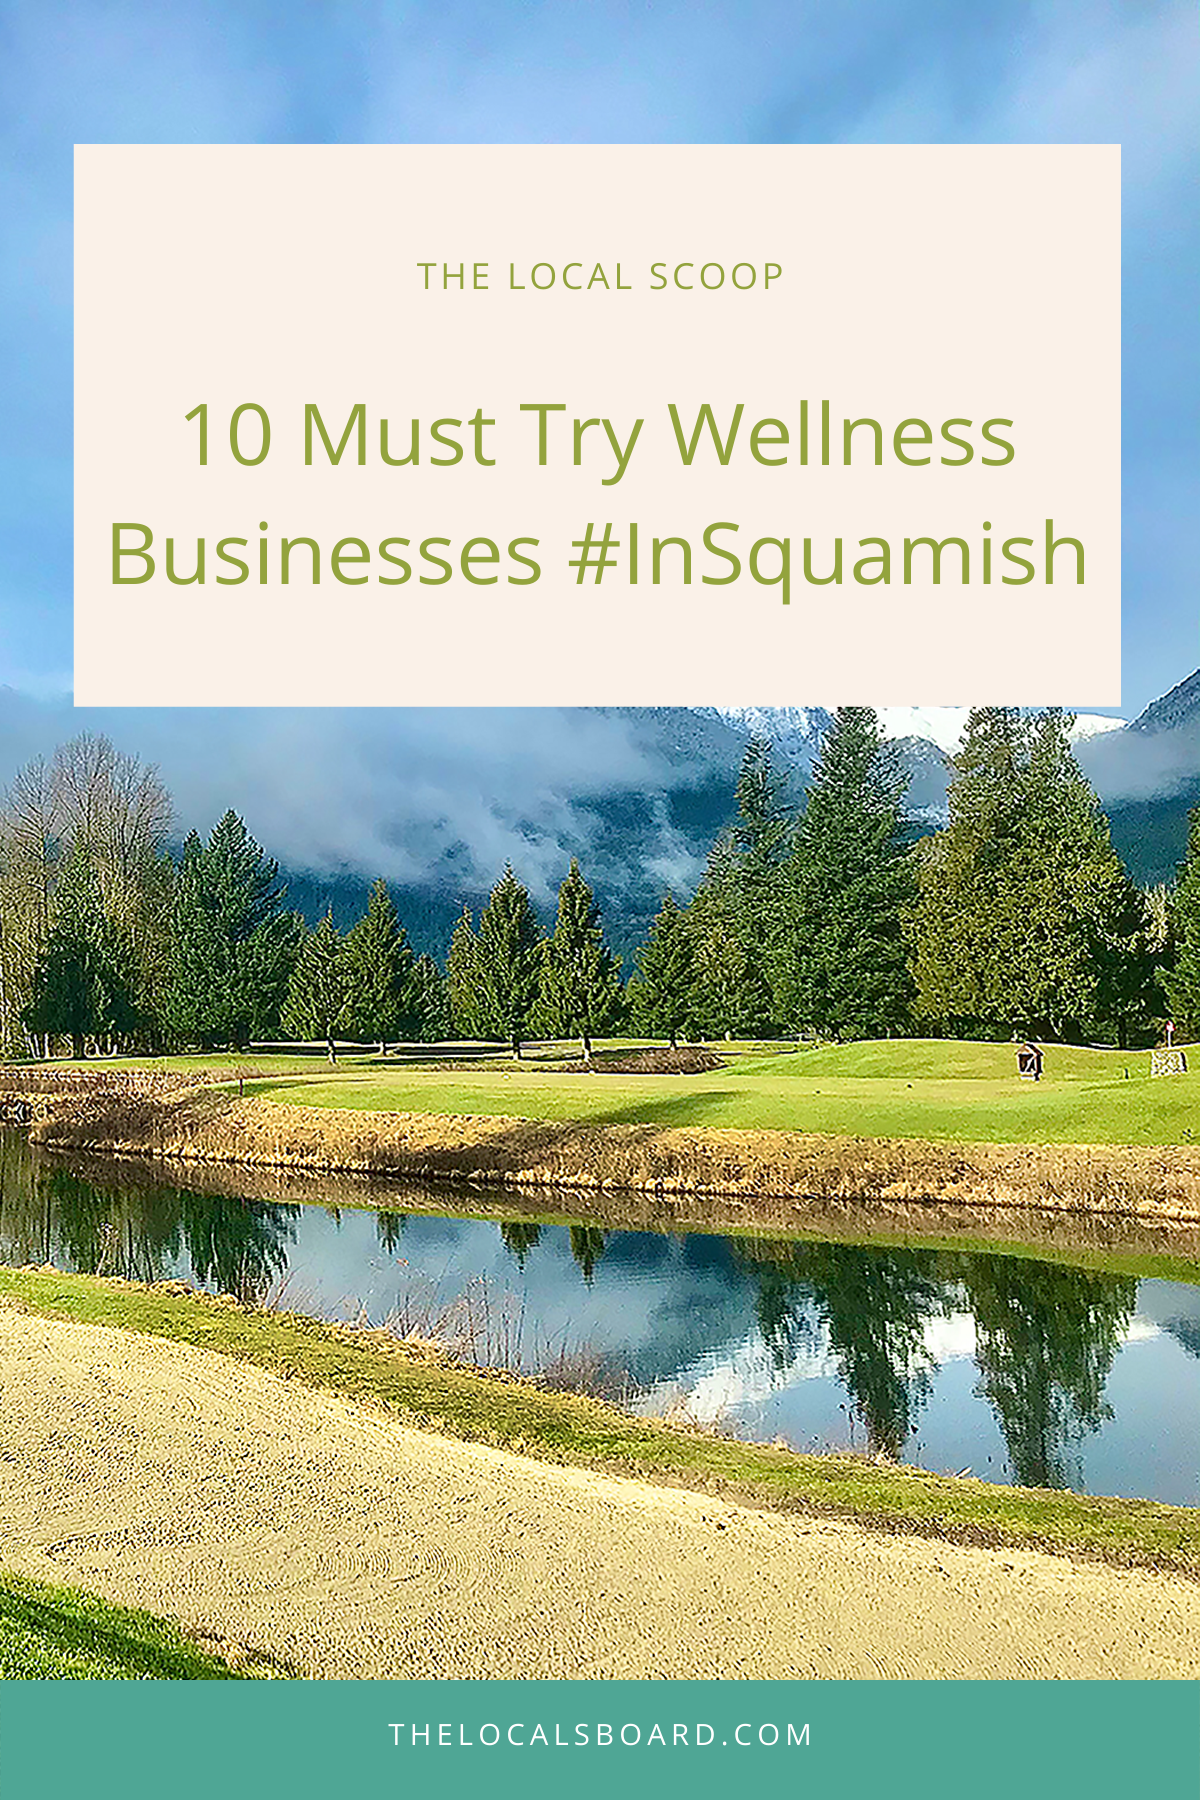 10 Must Try Wellness Businesses #inSquamish